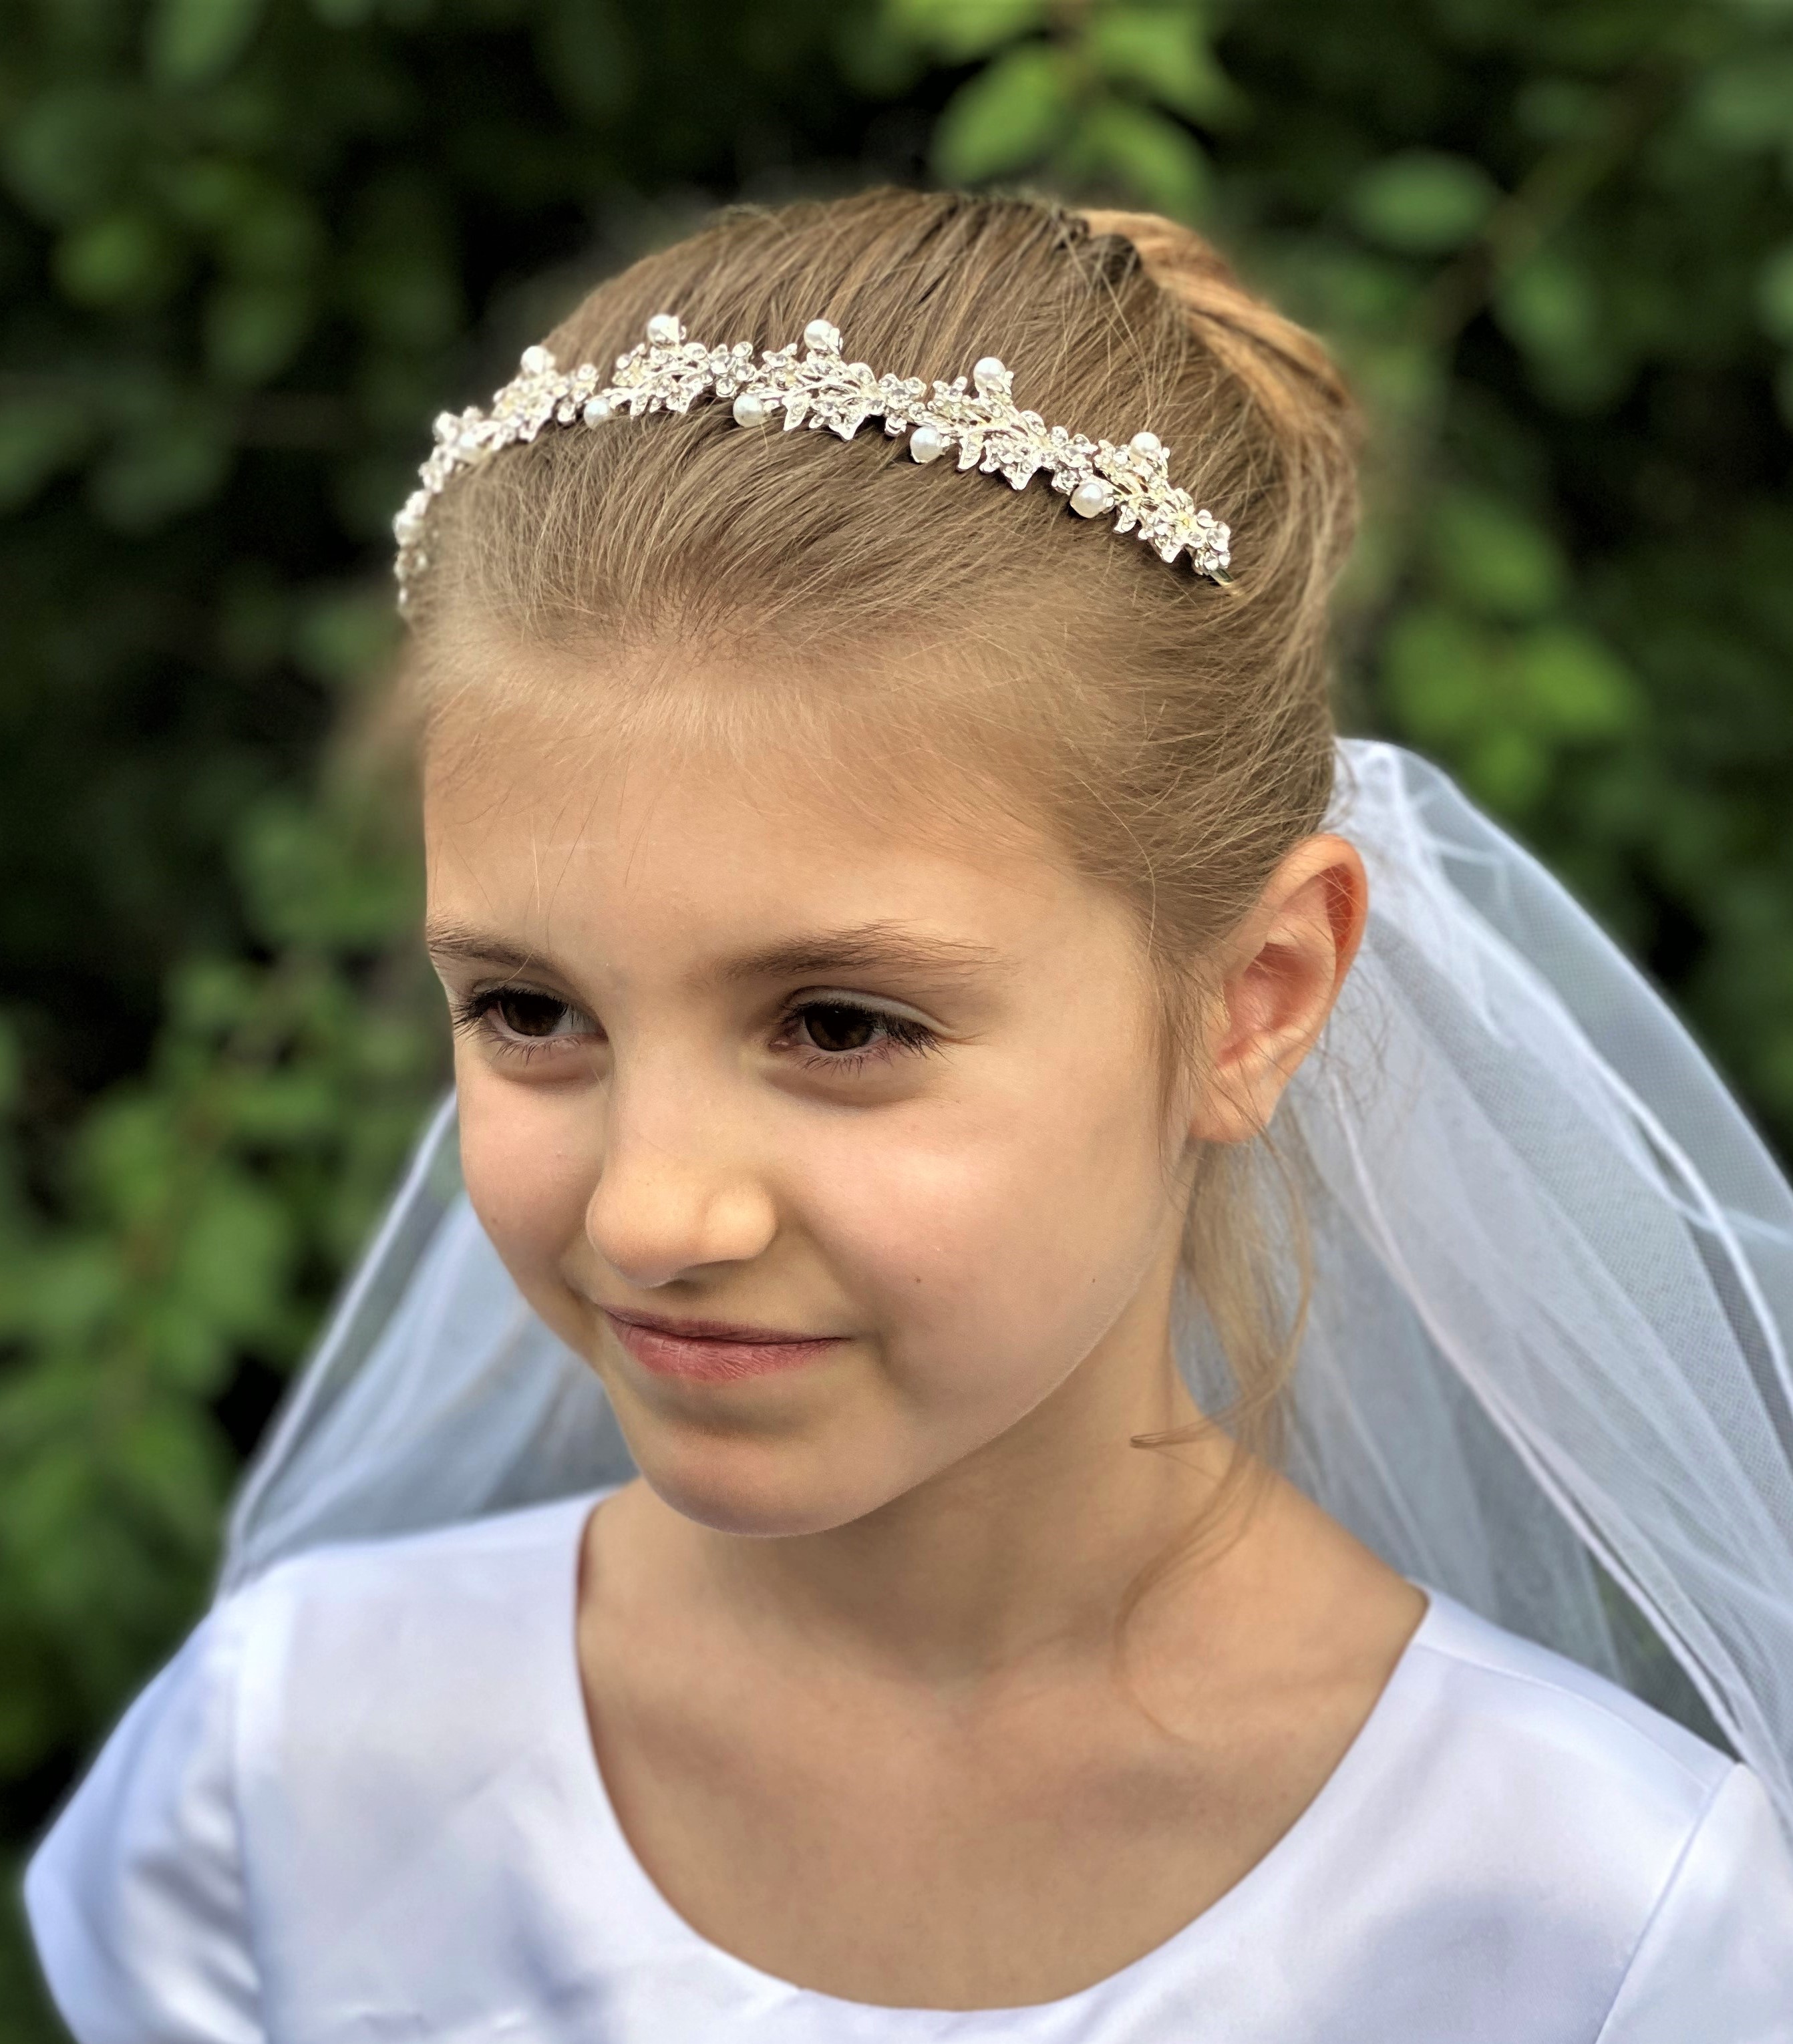 https://shop.catholicsupply.com/Shared/Images/Product/Pearl-Flowers-and-Rhinestone-Crown-First-Communion-Veil/120979-1.jpg